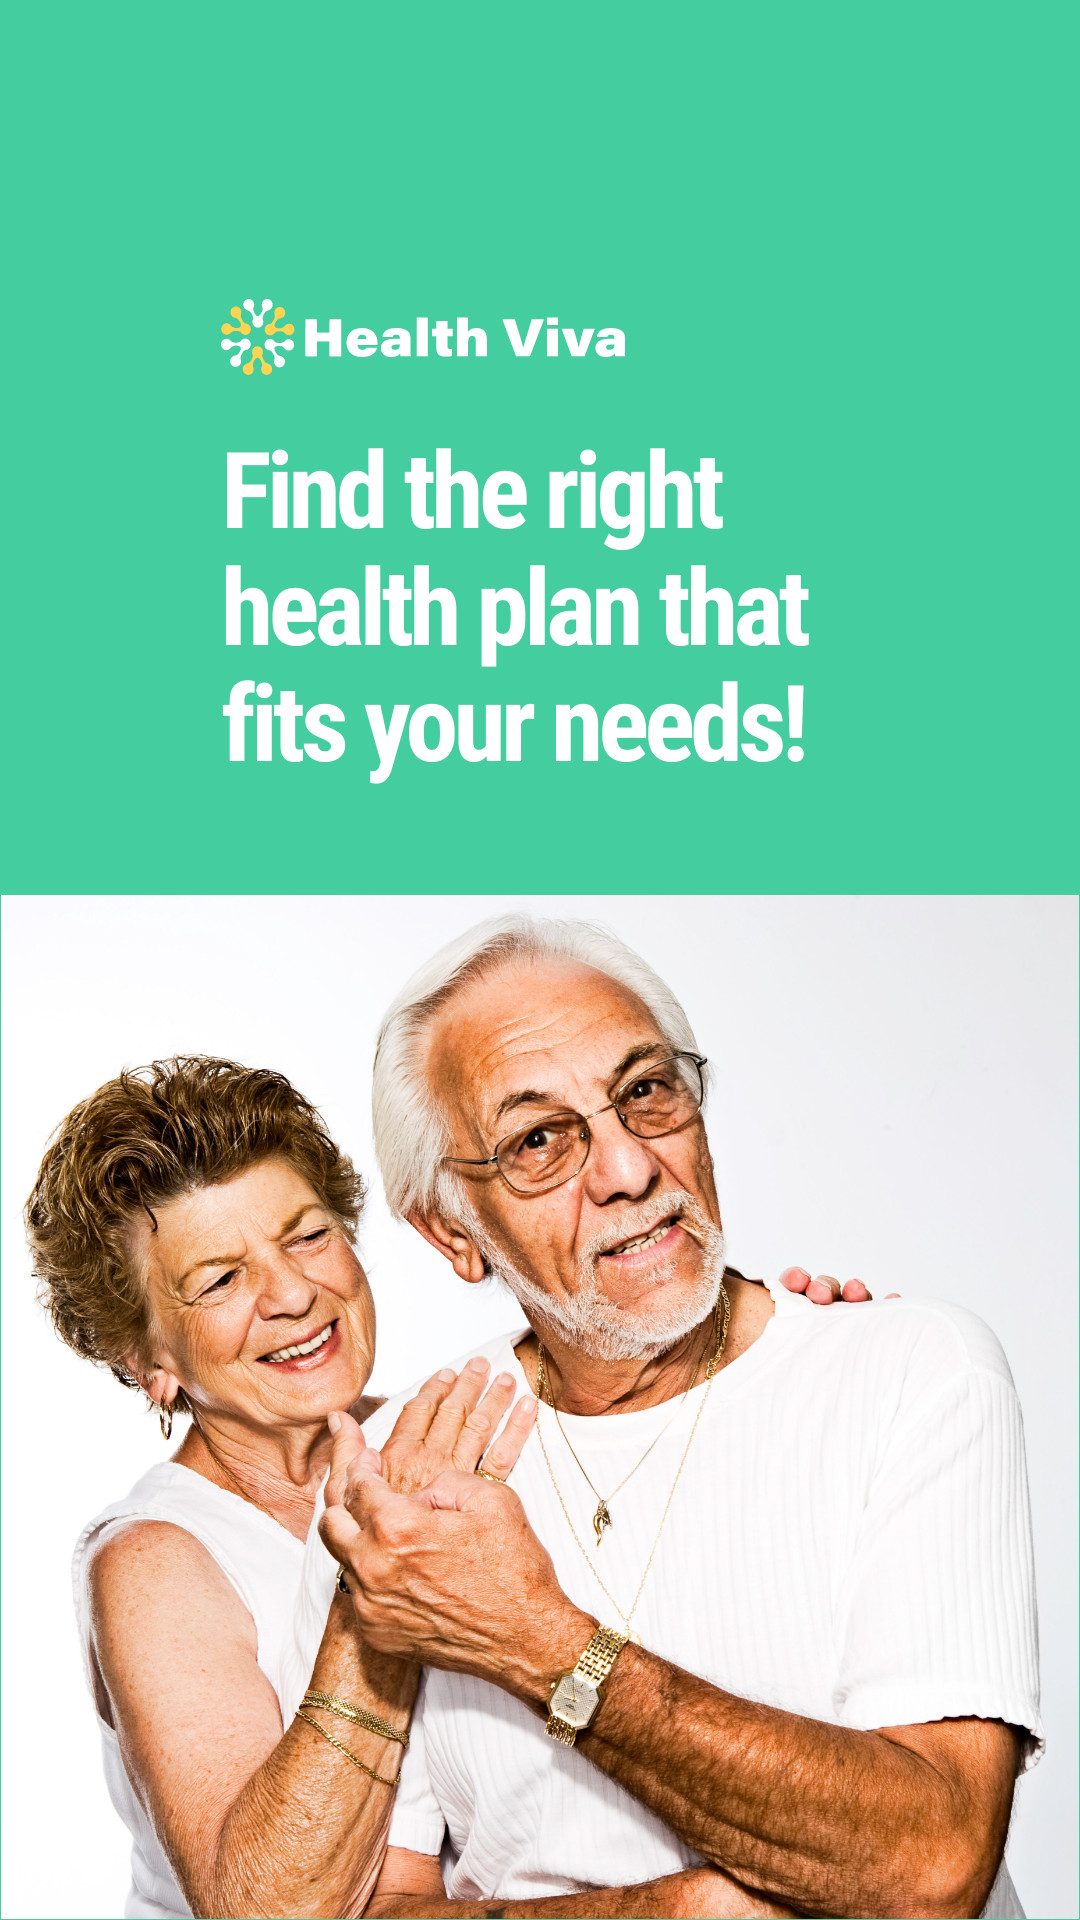 The Right Health Plan Inline Rectangle 300x250